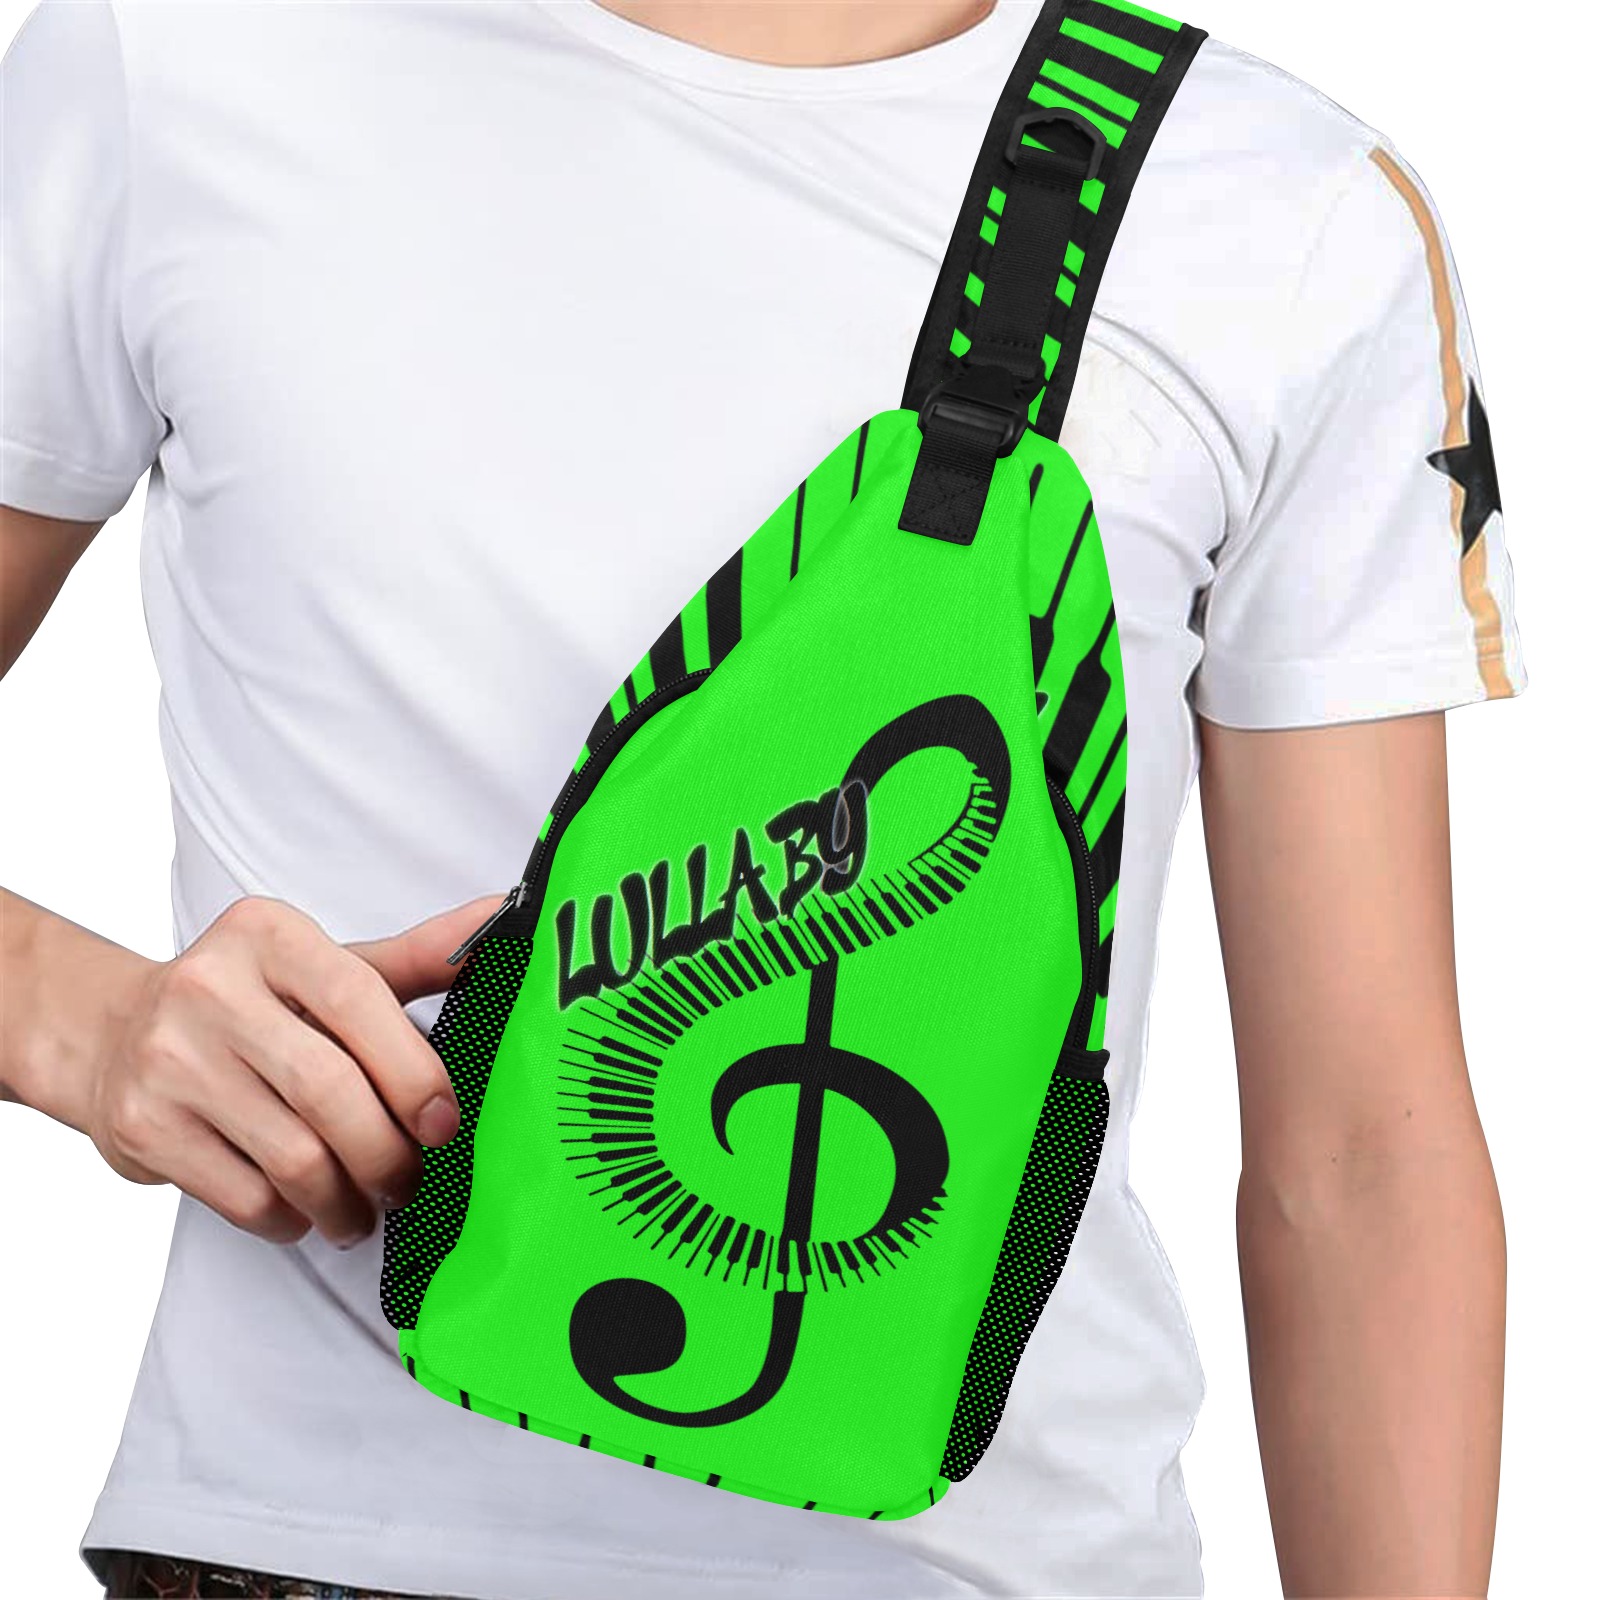 Lullaby Men Tote Lime Green Men's Casual Chest Bag (Model 1729)